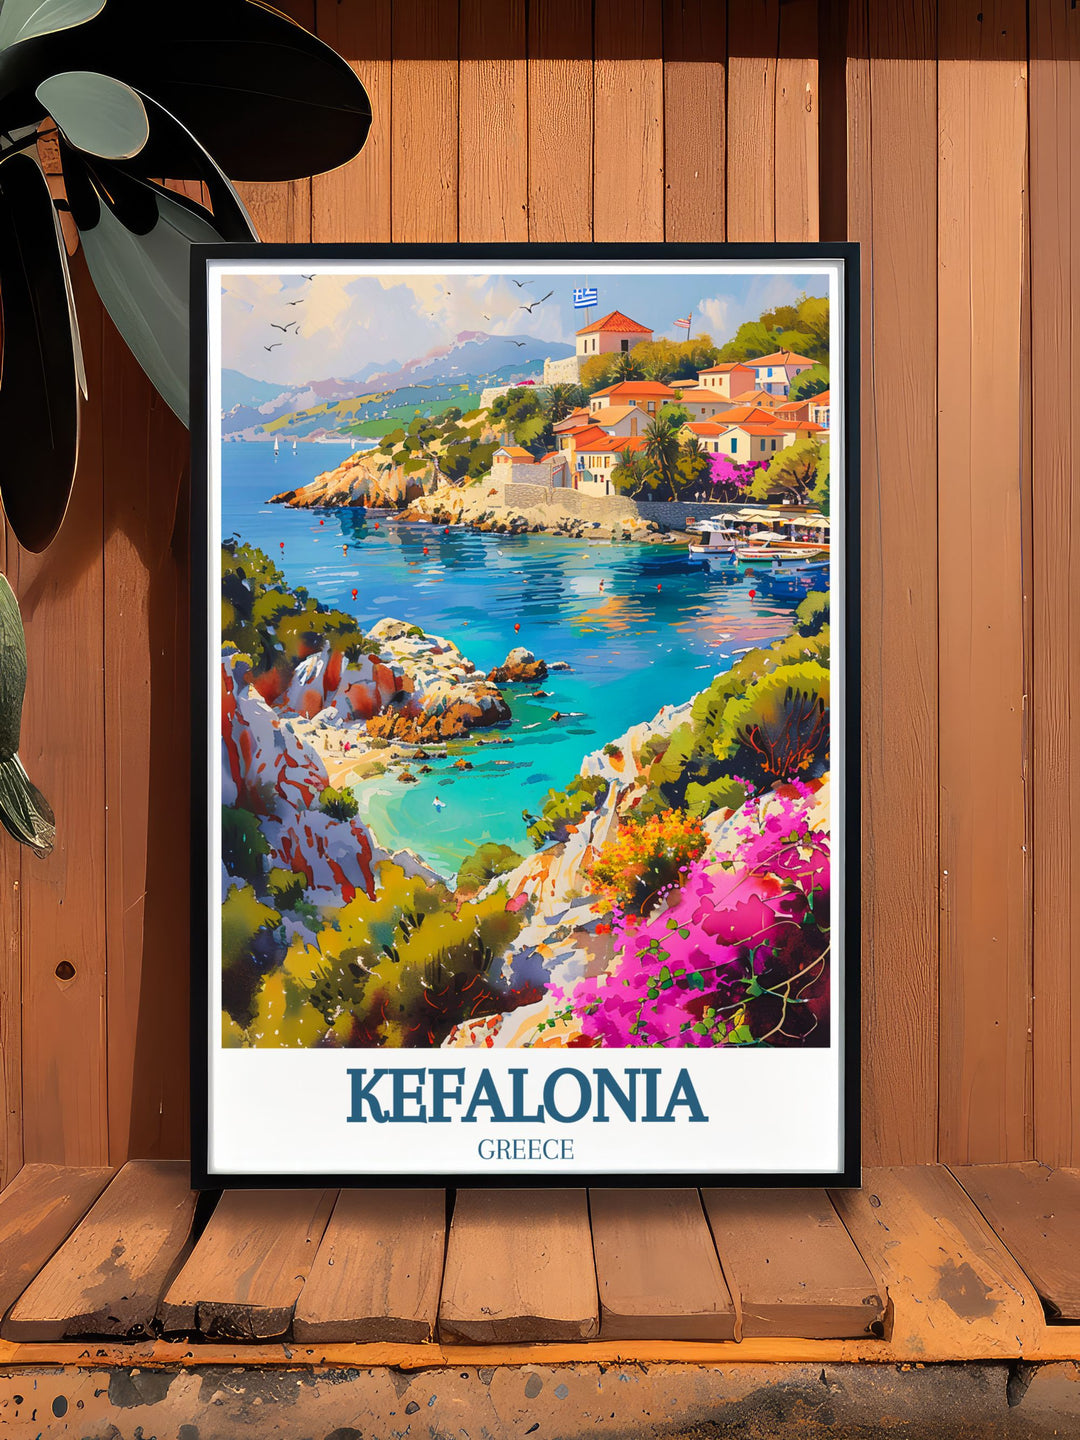 Vibrant depiction of Kefalonia, reflecting its historical landmarks, stunning beaches, and scenic beauty. The travel poster highlights the islands natural splendor and cultural heritage.